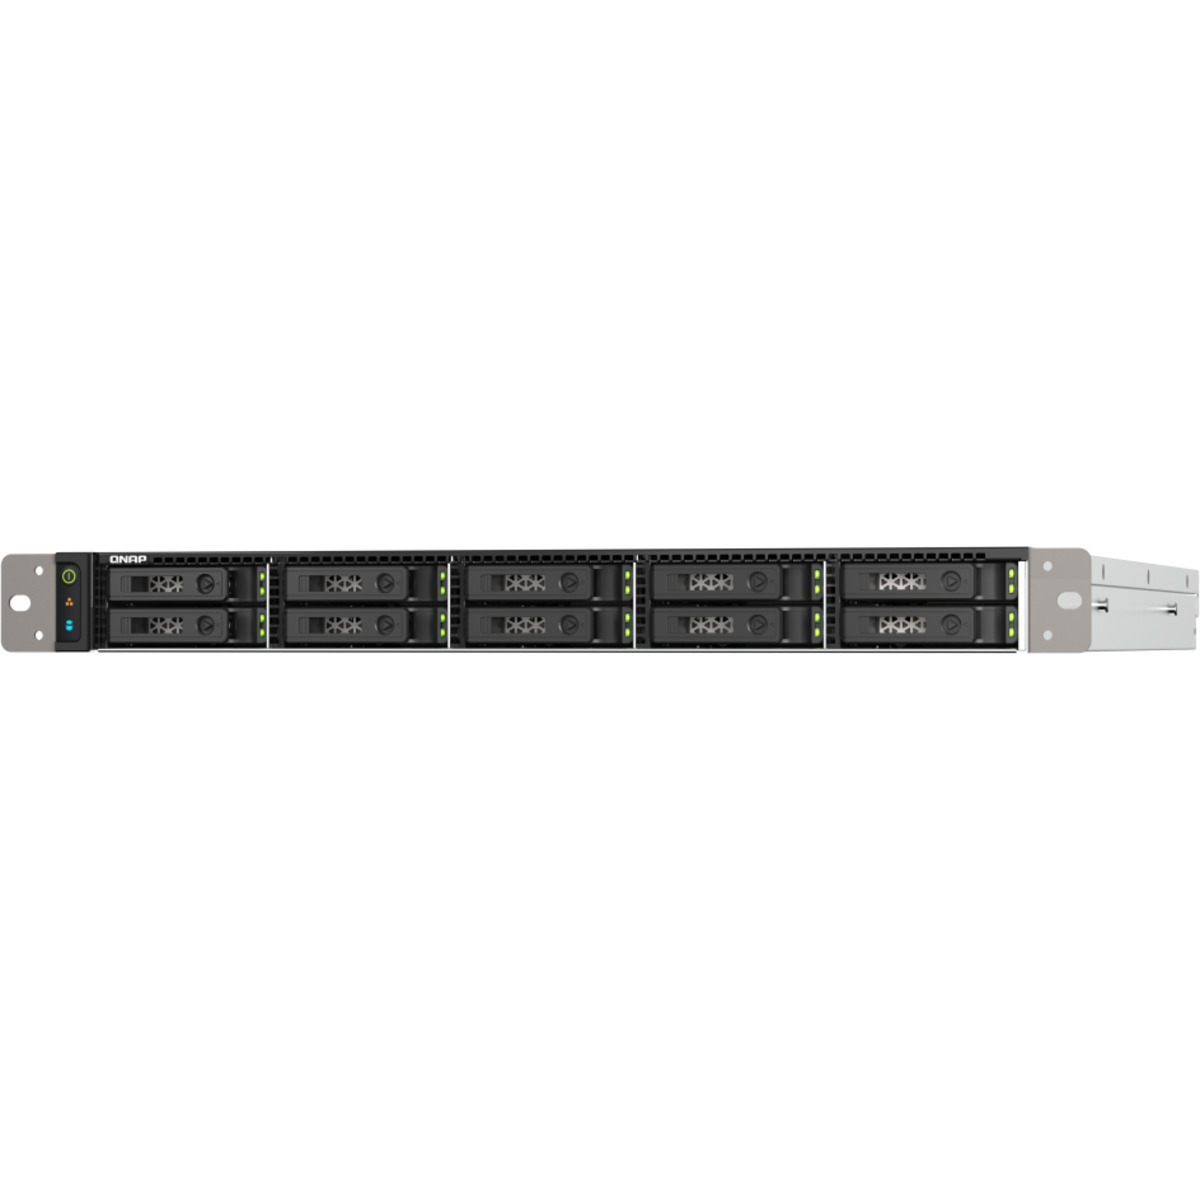 QNAP TS-h1090FU-7302P 18tb 10-Bay RackMount Large Business / Enterprise NAS - Network Attached Storage Device 9x2tb Sandisk Plus Series SDSSDA3N-2T00  3200/3000MB/s M.2 2280 NVMe SSD CONSUMER Class Drives Installed - Burn-In Tested TS-h1090FU-7302P